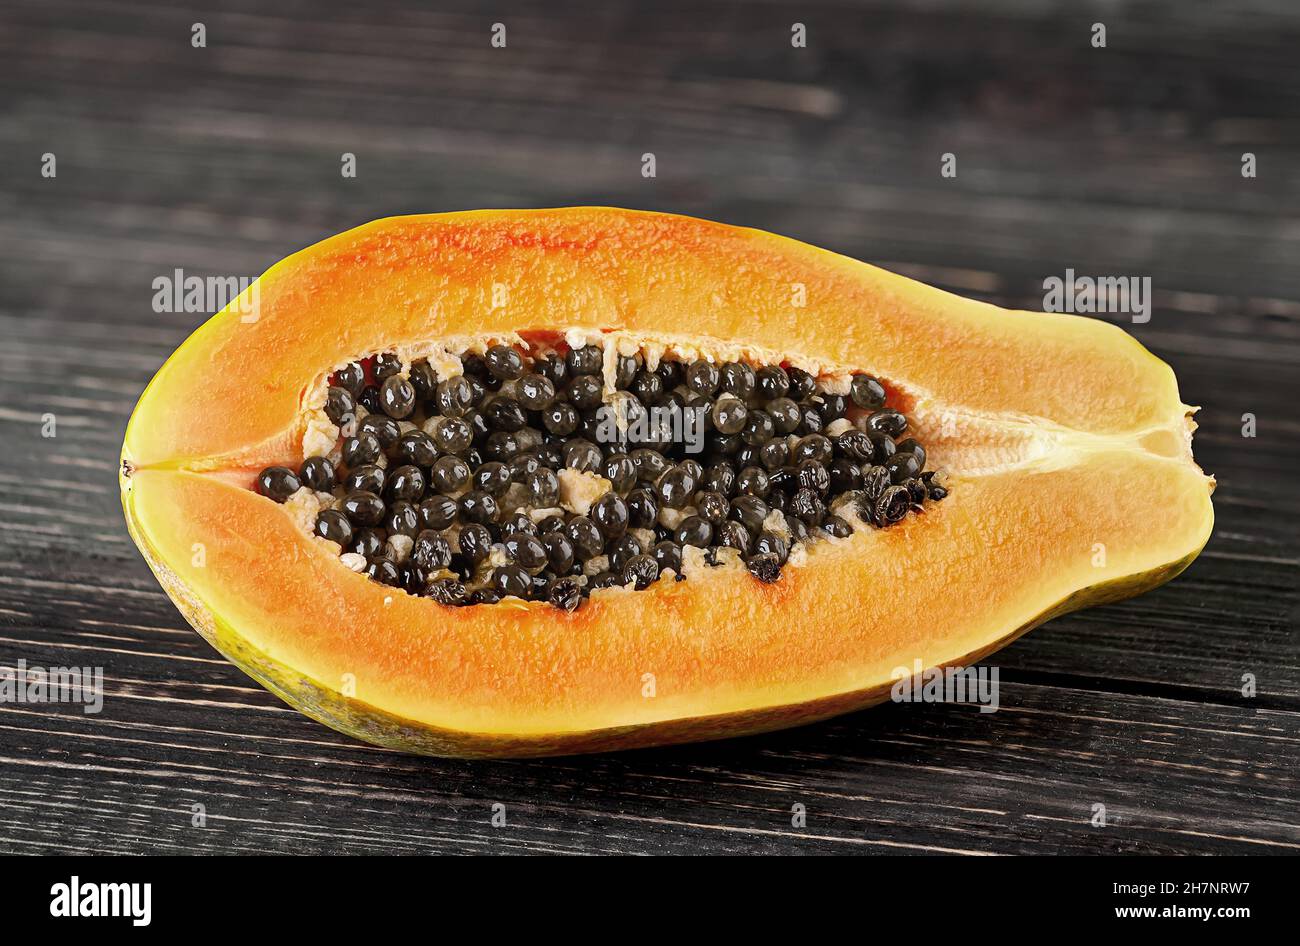 Half papaya on a wooden table. Papaya lies on dark boards with a blurred background. Stock Photo